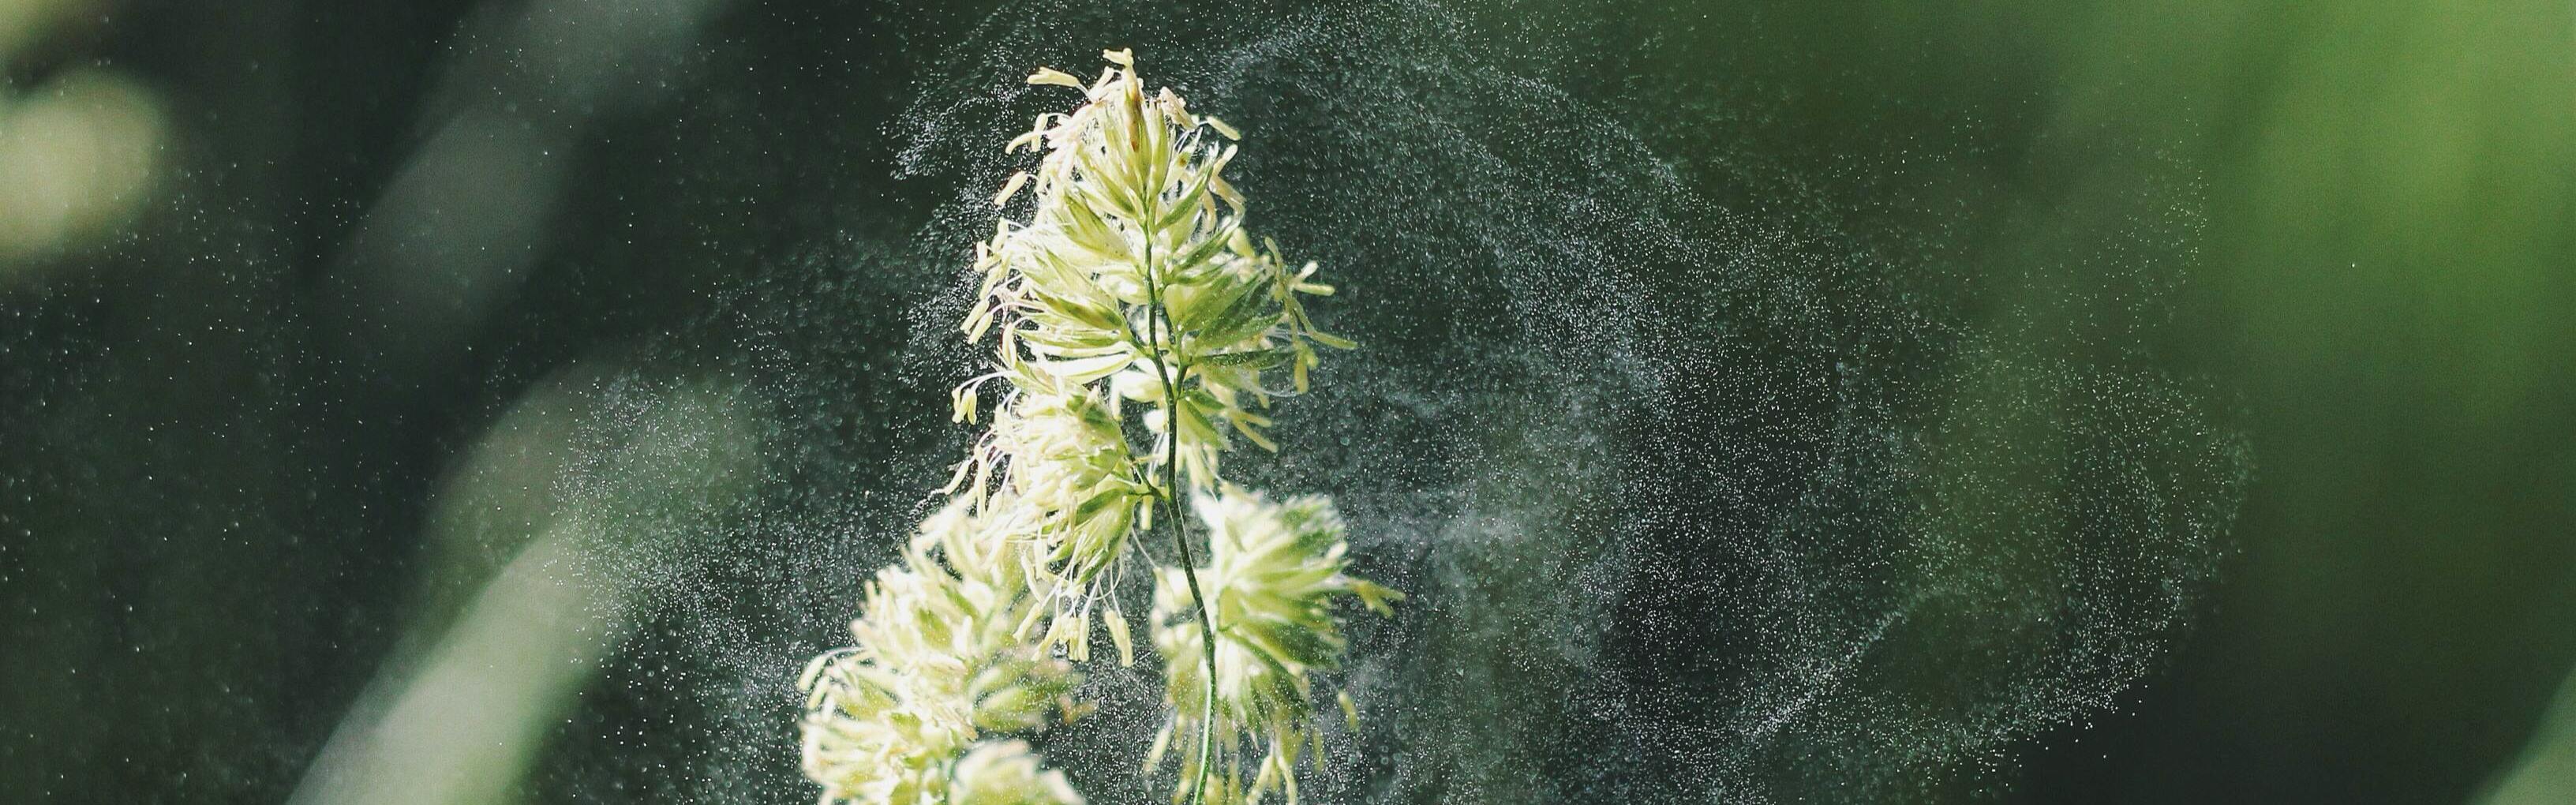 A flowering plant sheds pollen that floats through the air. 